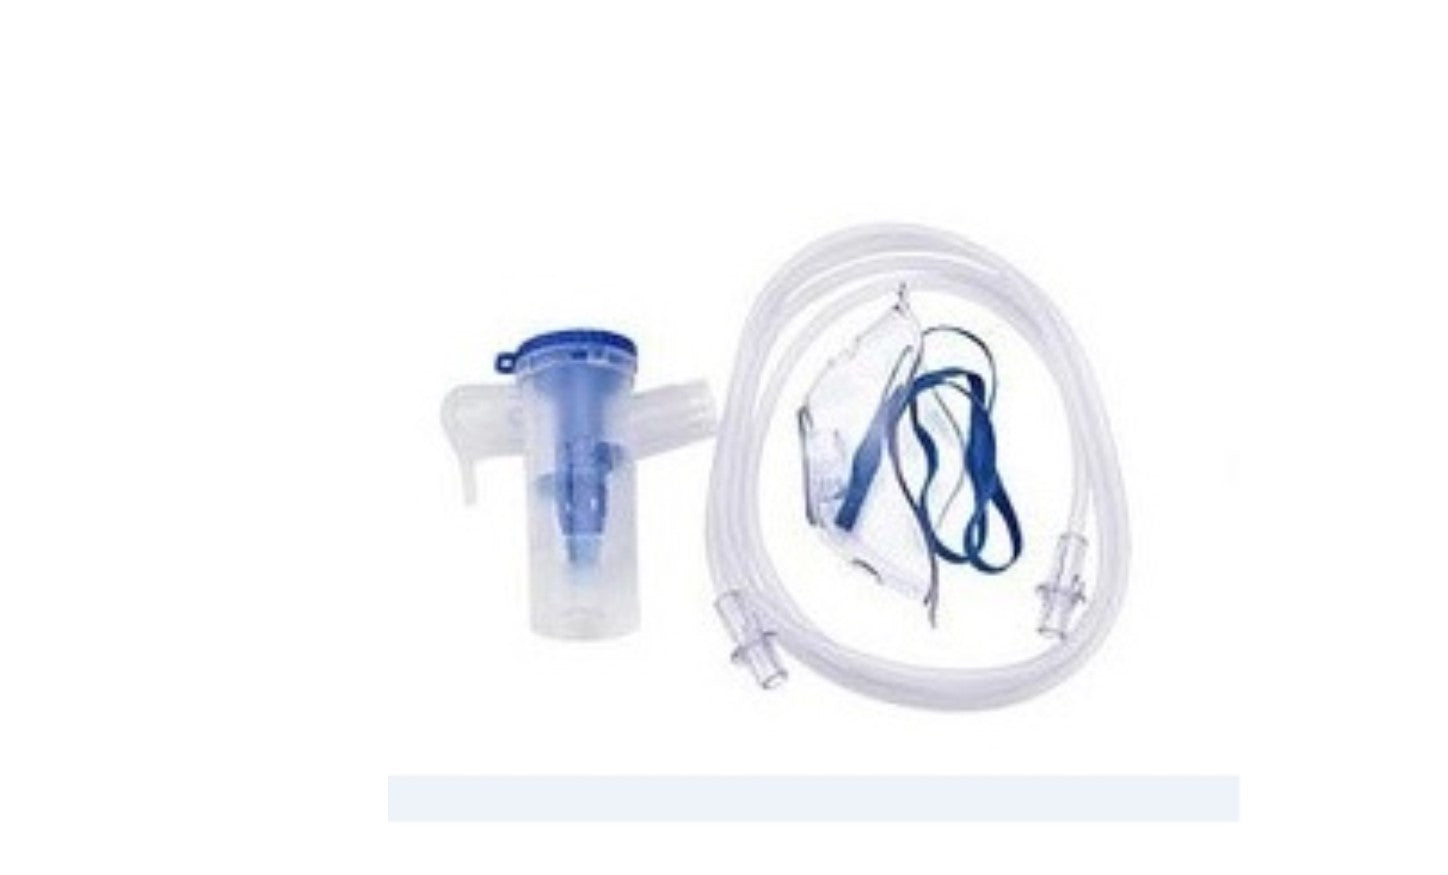 Accessories For Home Oxygen Concentrators